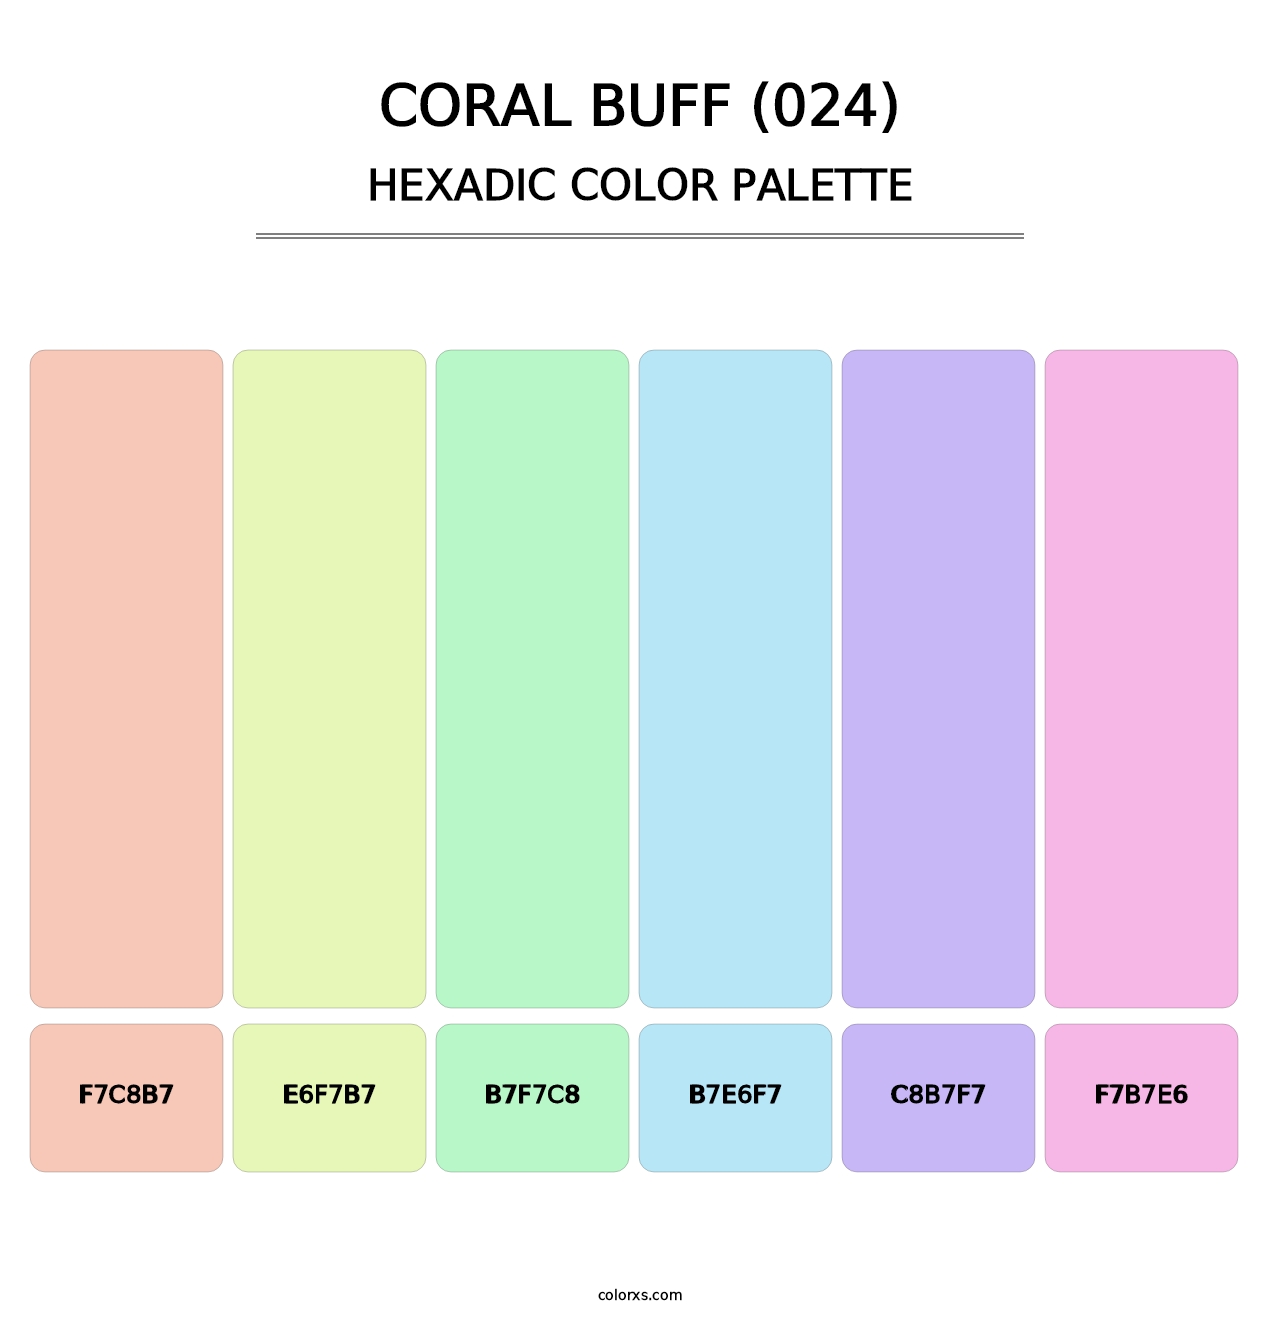 Coral Buff (024) - Hexadic Color Palette